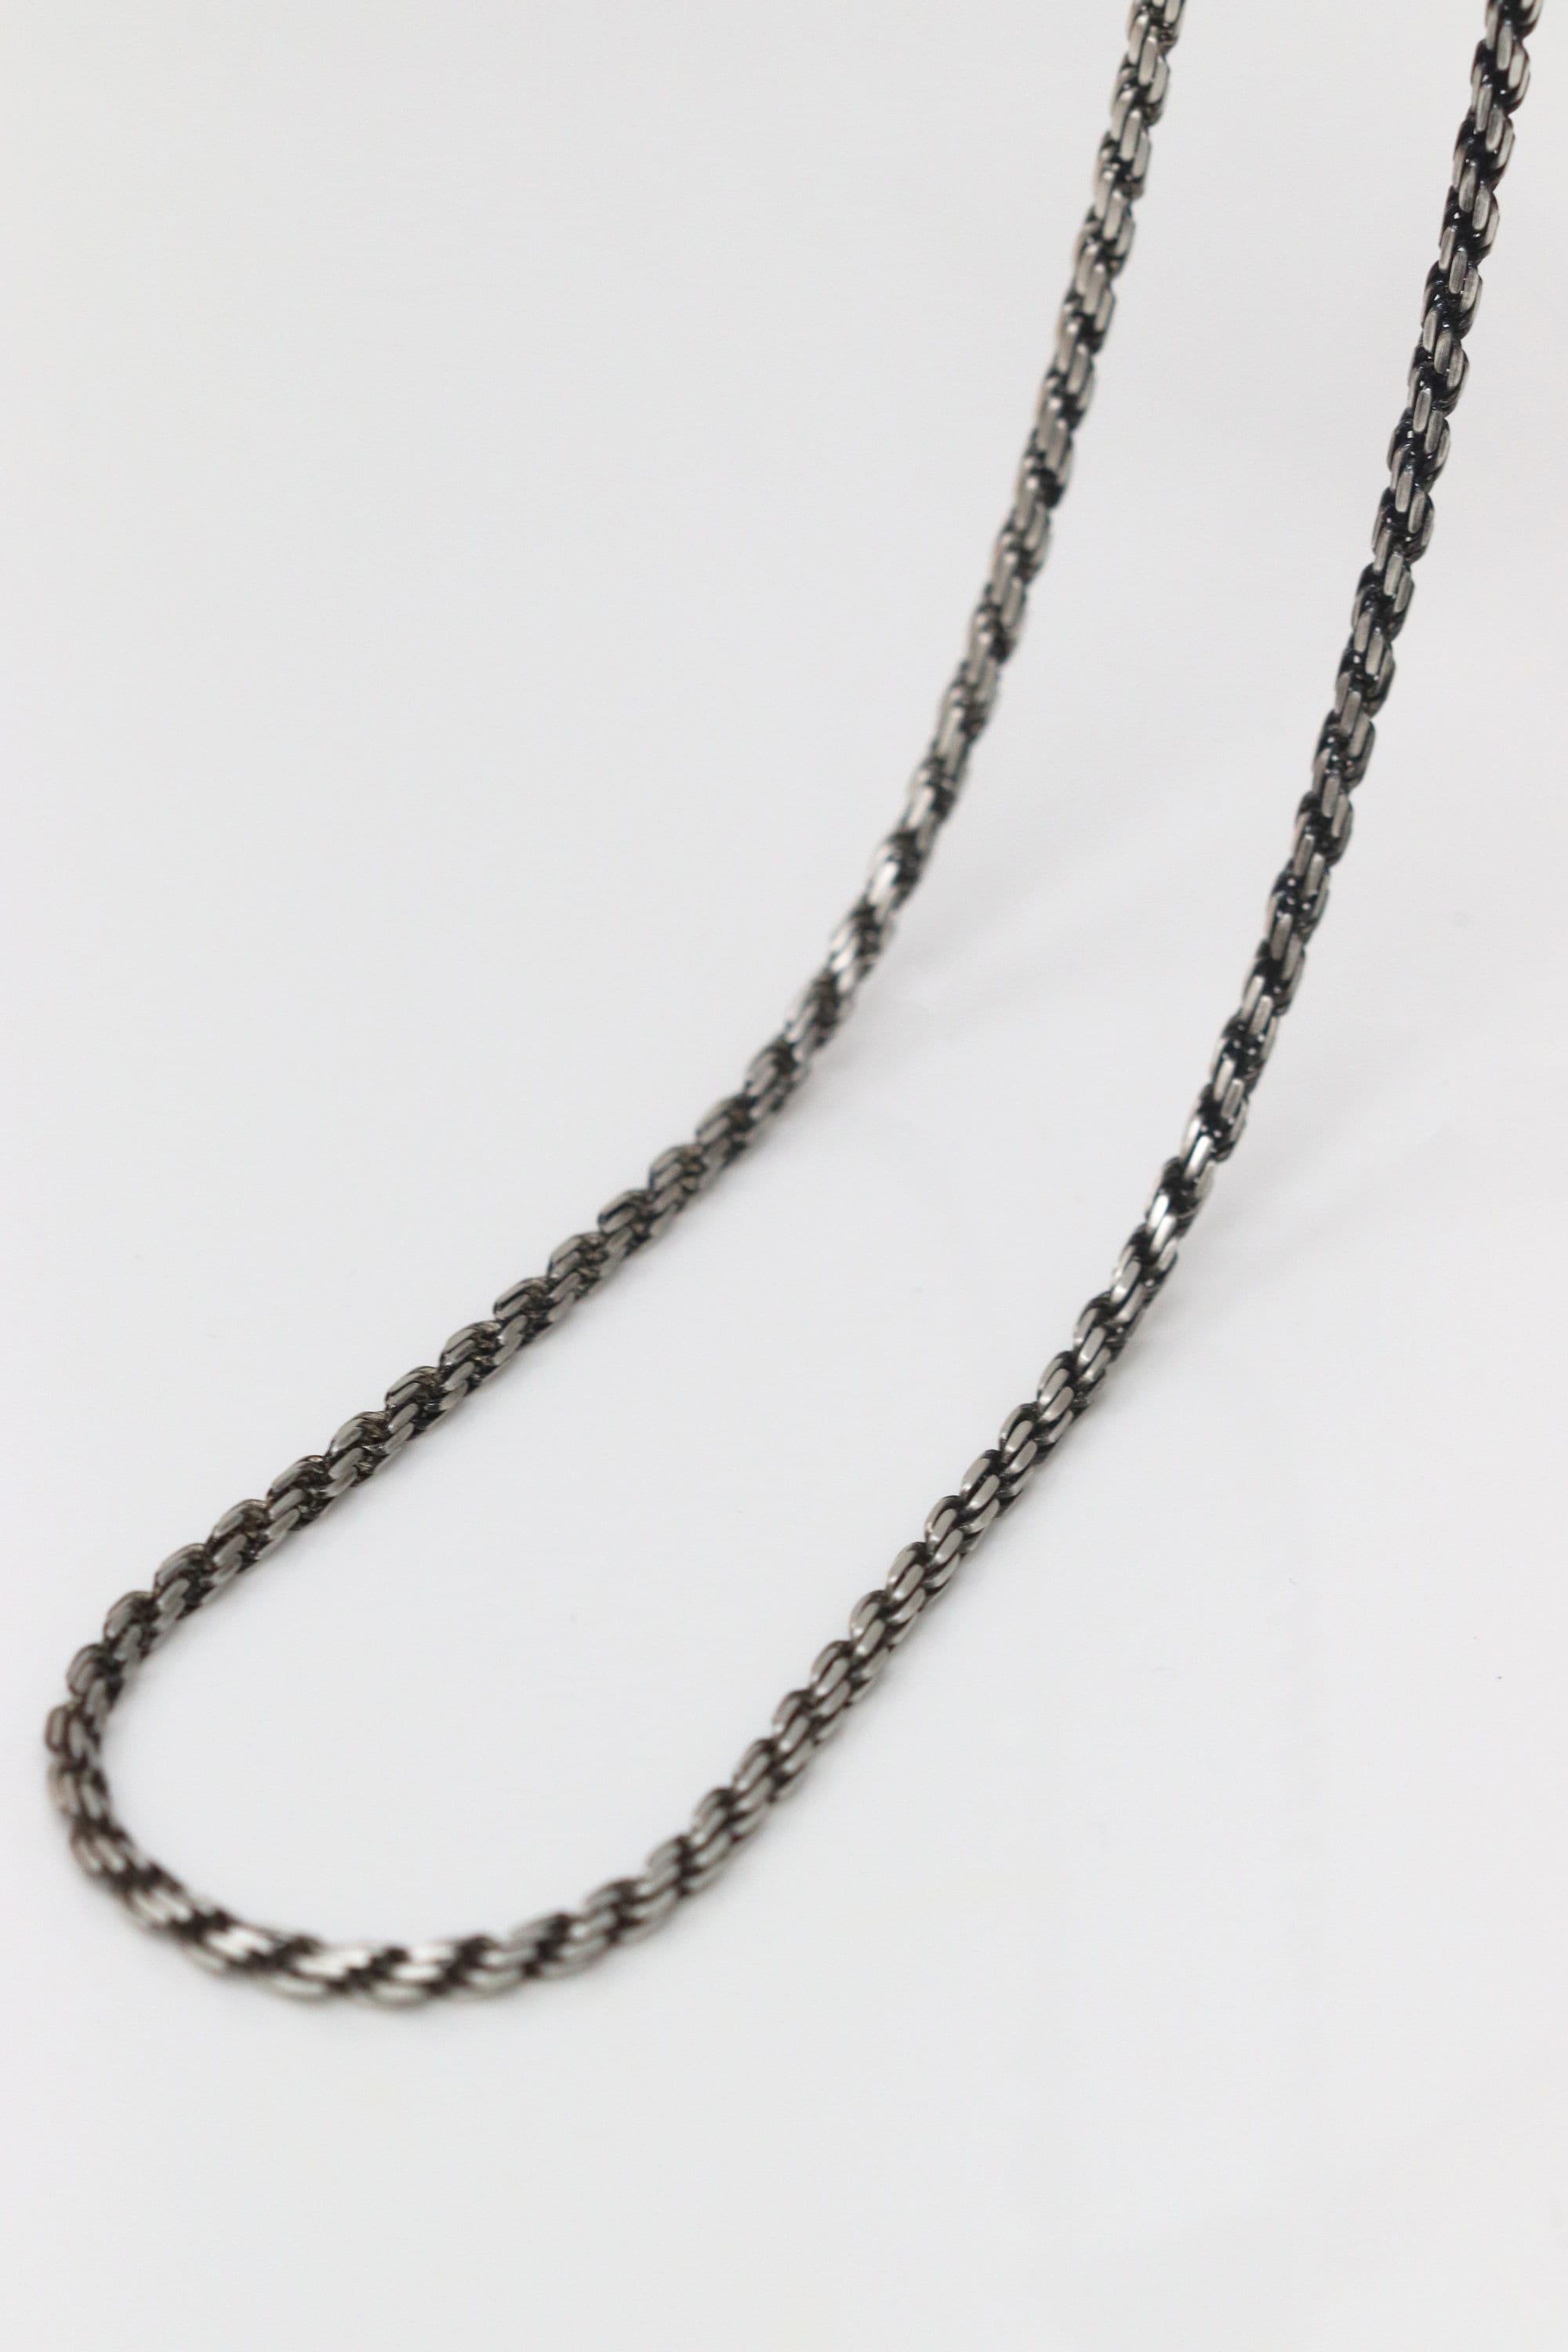 1.6mm Sterling Silver Oxidized Wheat Necklace Chain for Pendants 